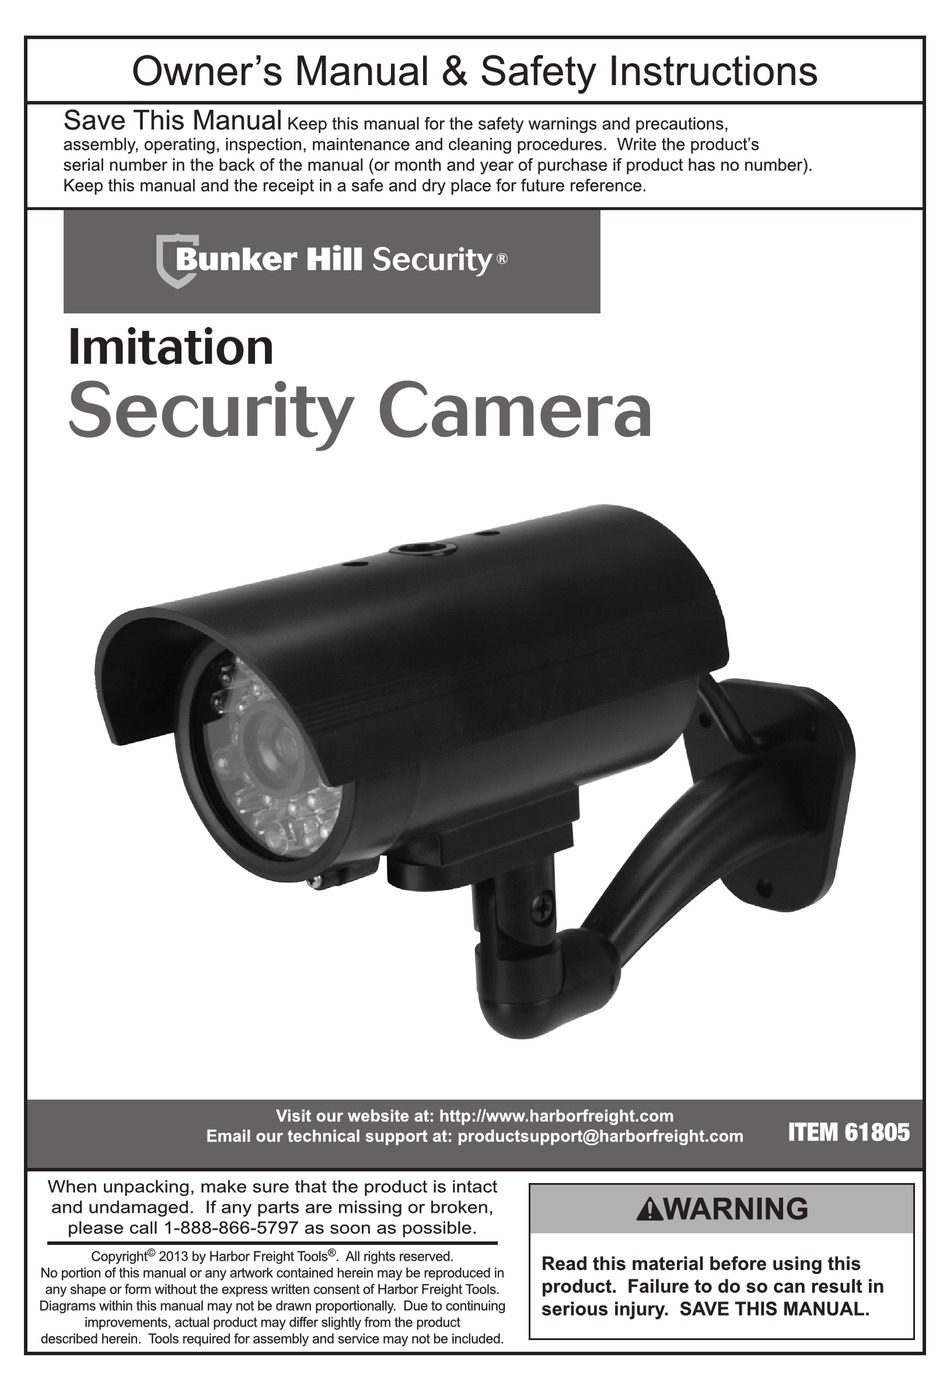 bunker hill security camera 61208